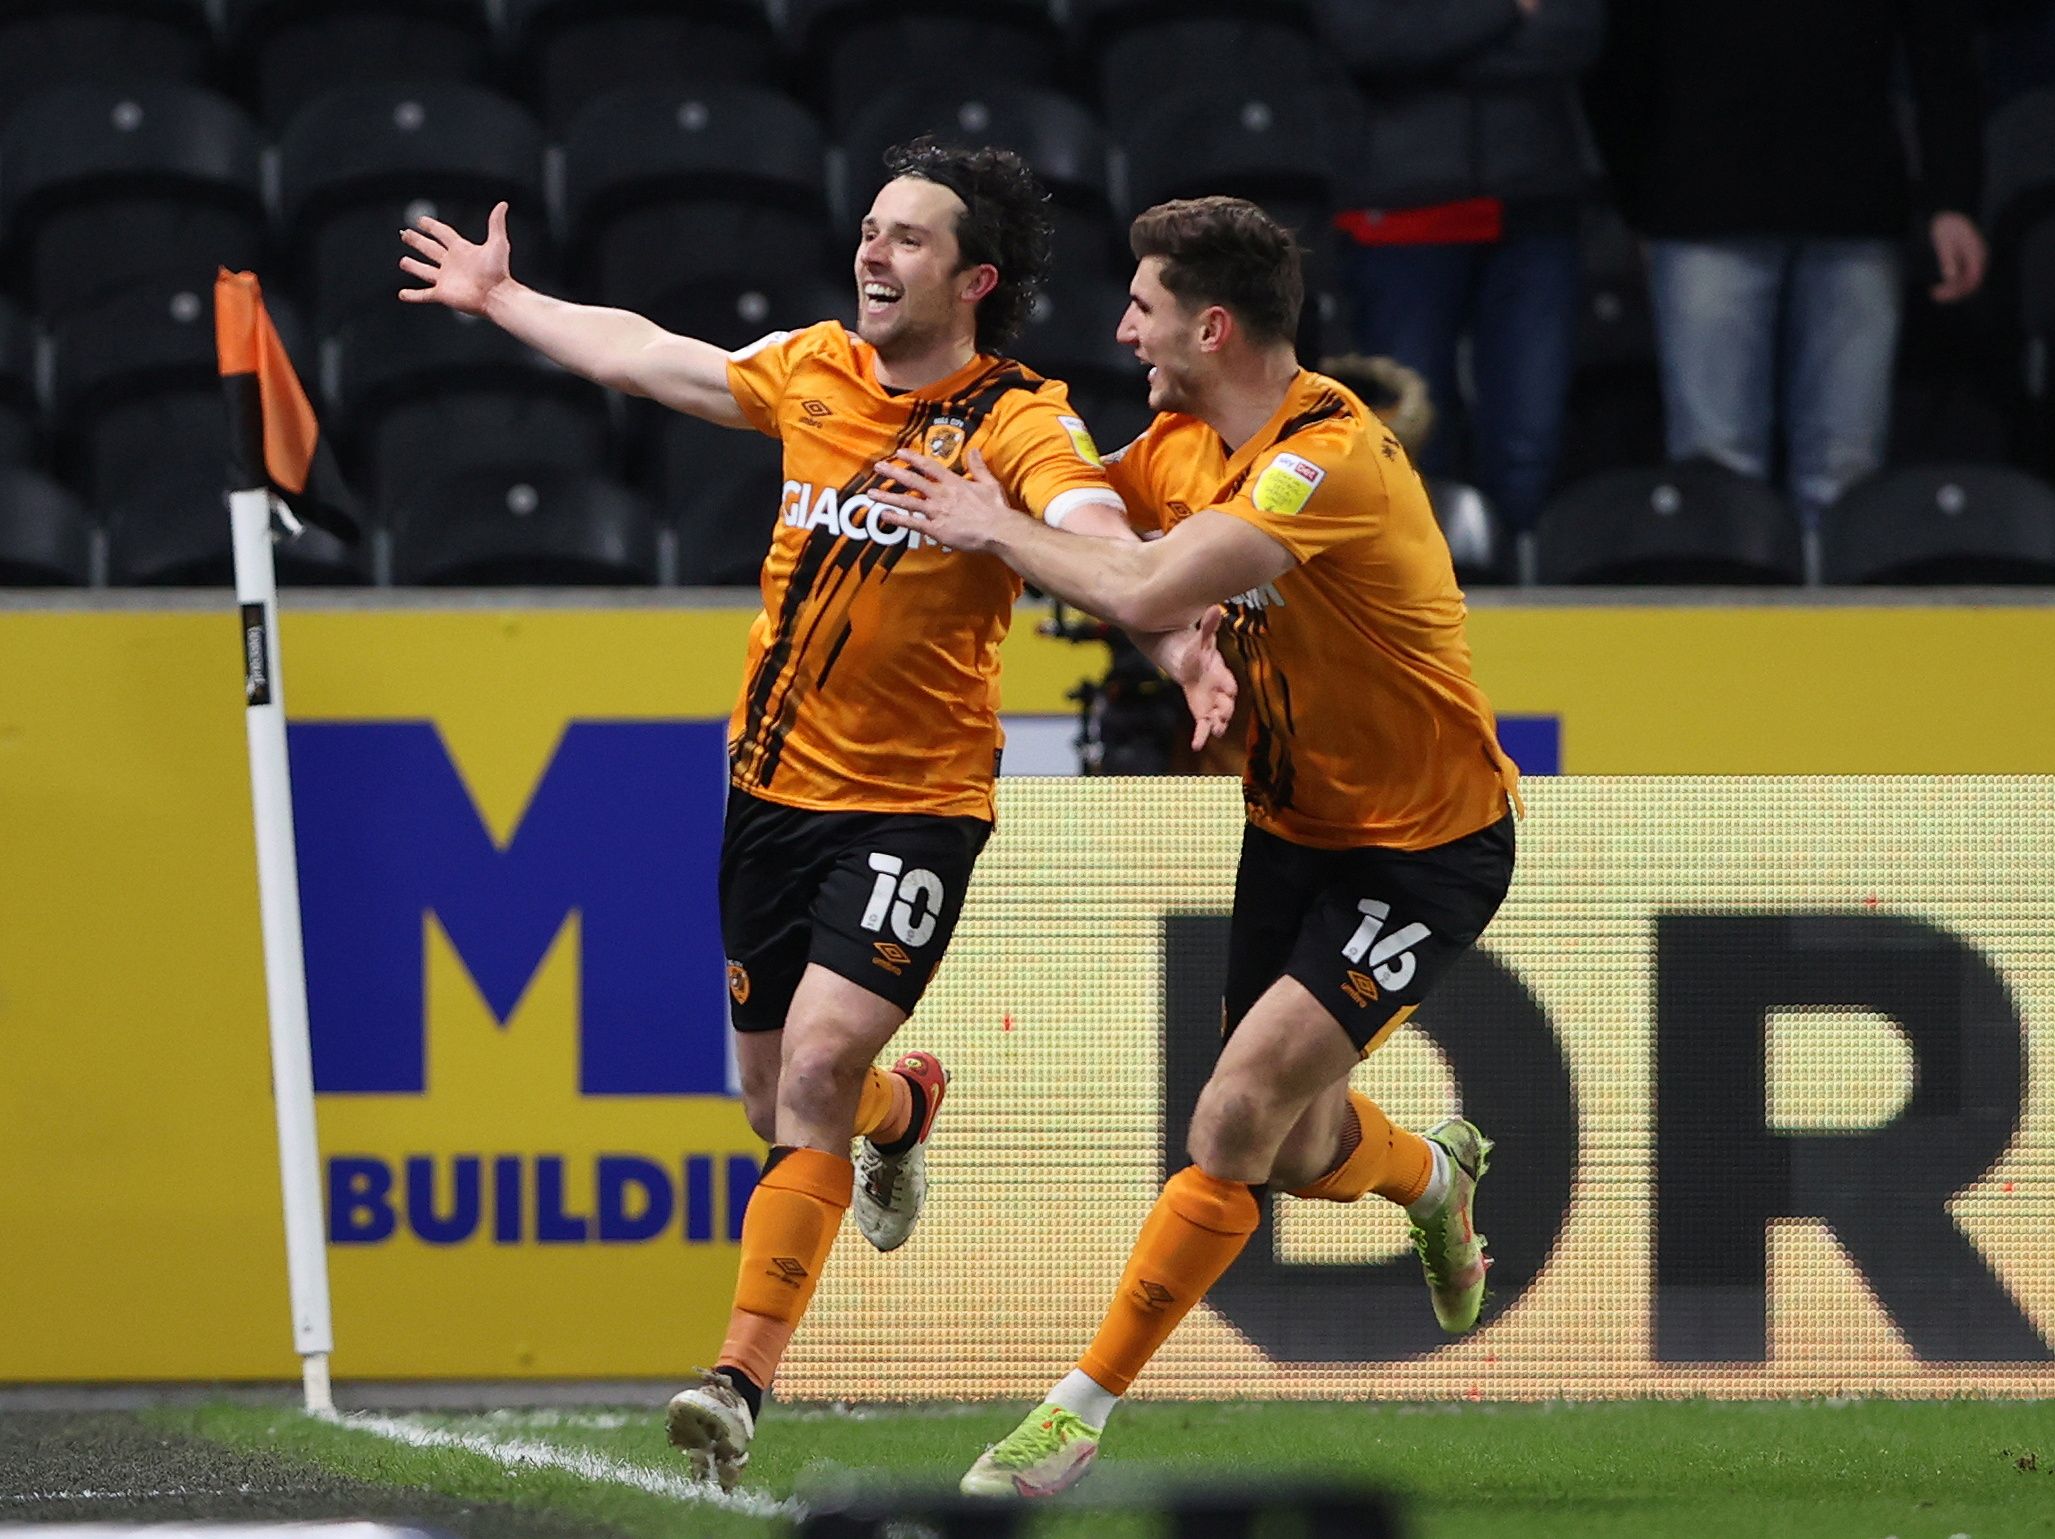 Soccer Football - Championship - Hull City v Blackburn Rovers - KCOM Stadium, Hull, Britain - January 19, 2022  Hull City's George Honeyman celebrates after scoring their first goal  Action Images/Molly Darlington  EDITORIAL USE ONLY. No use with unauthorized audio, video, data, fixture lists, club/league logos or 